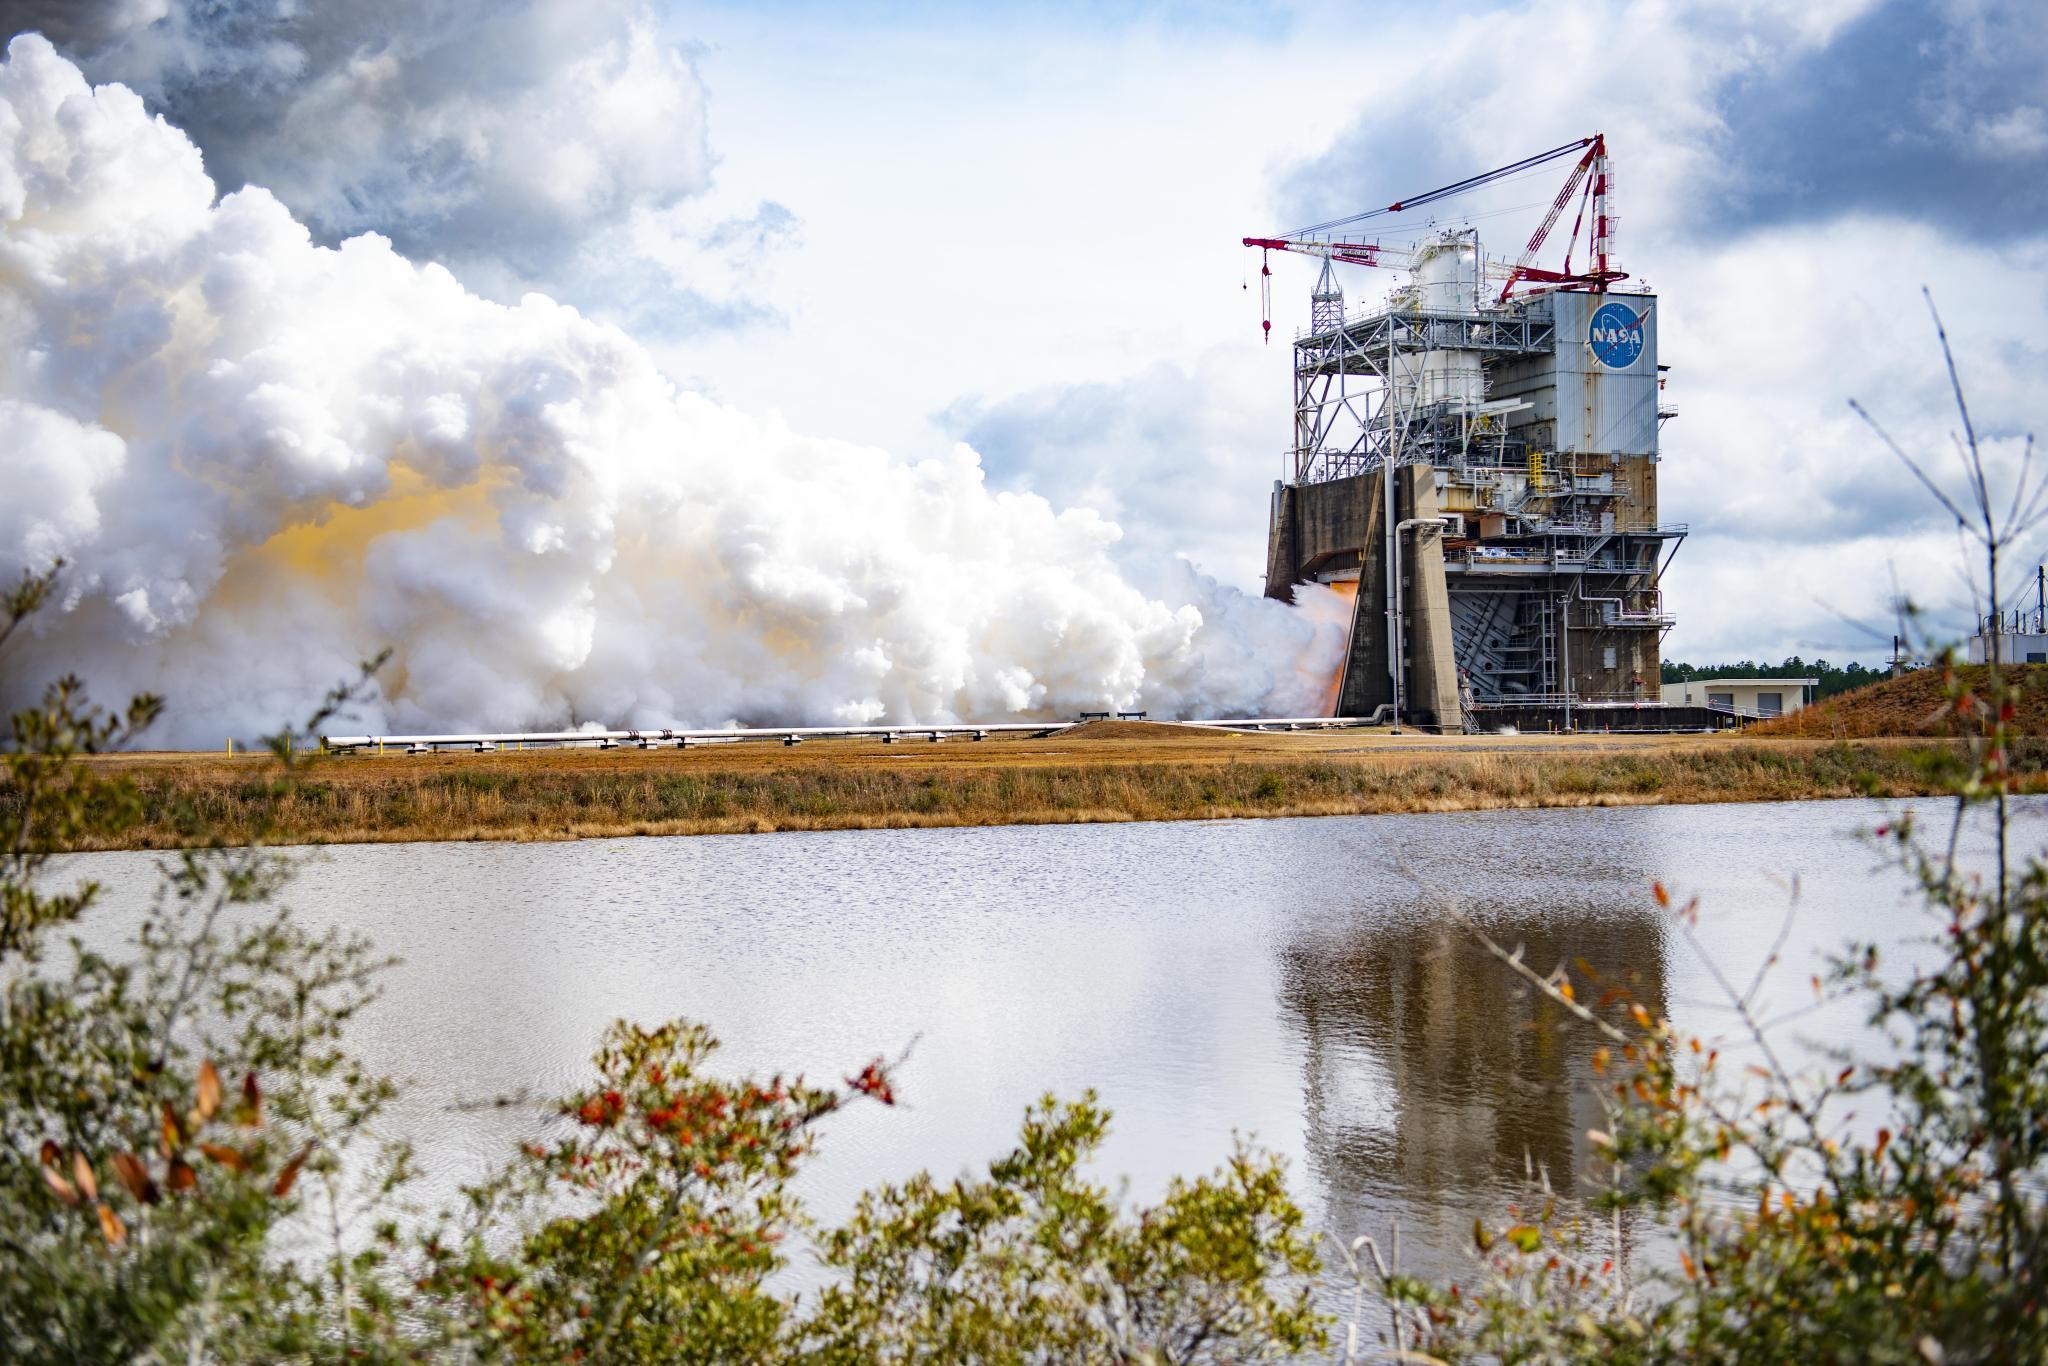 a full-duration, 500-second hot fire of an RS-25 certification engine Jan. 27 ongoing in the background as seen across the water